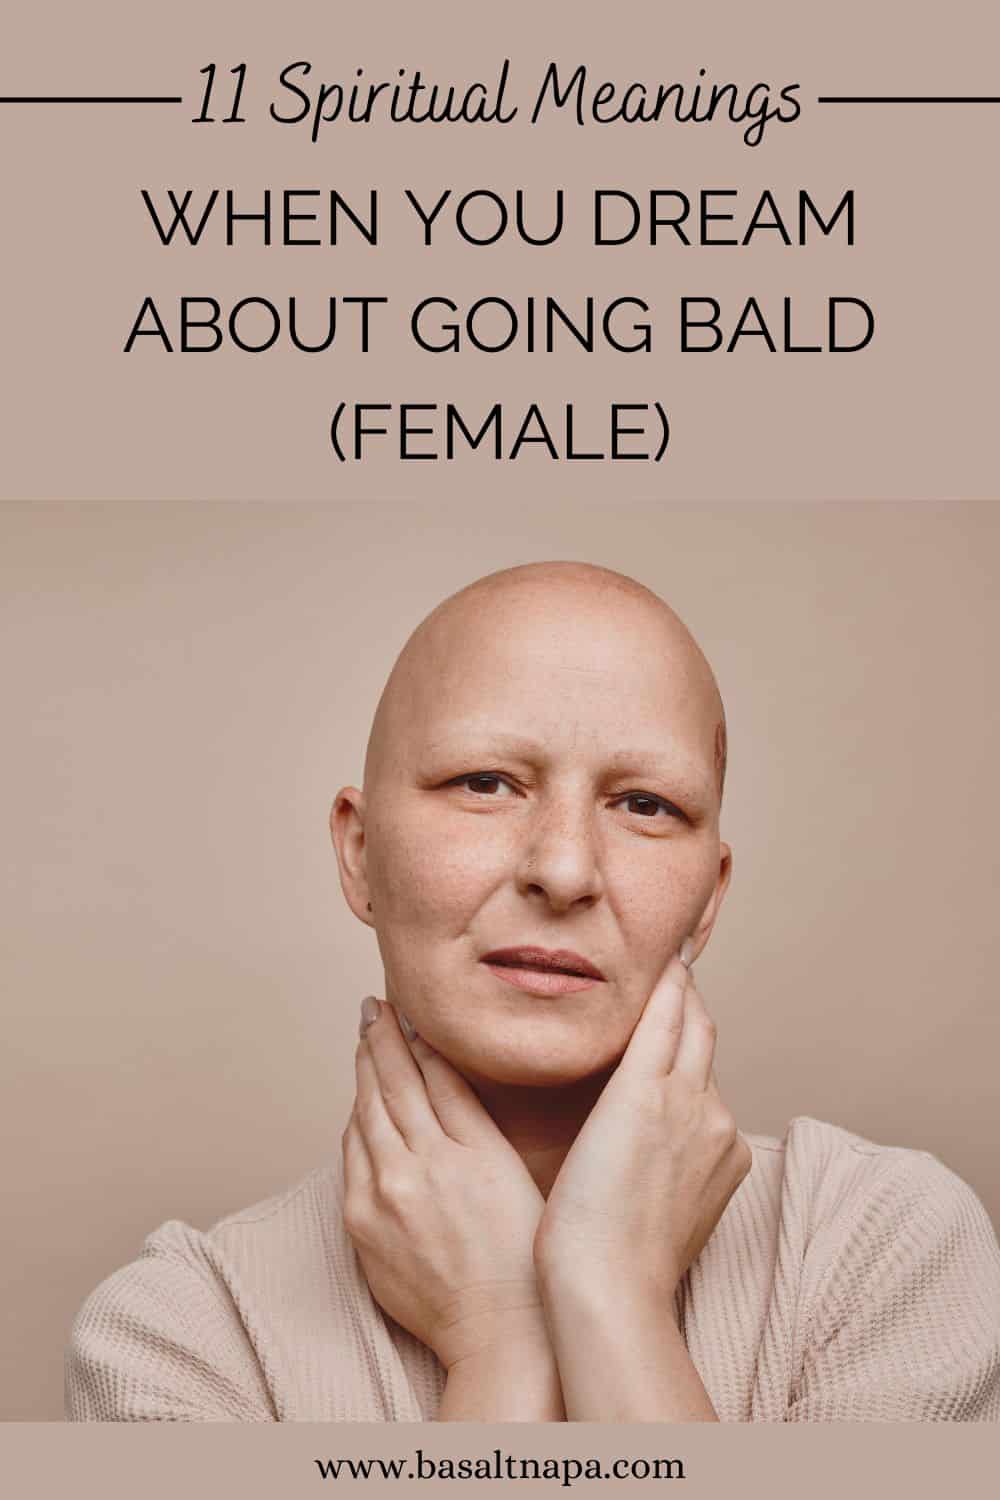 What Does It Mean When You Dream About Going Bald